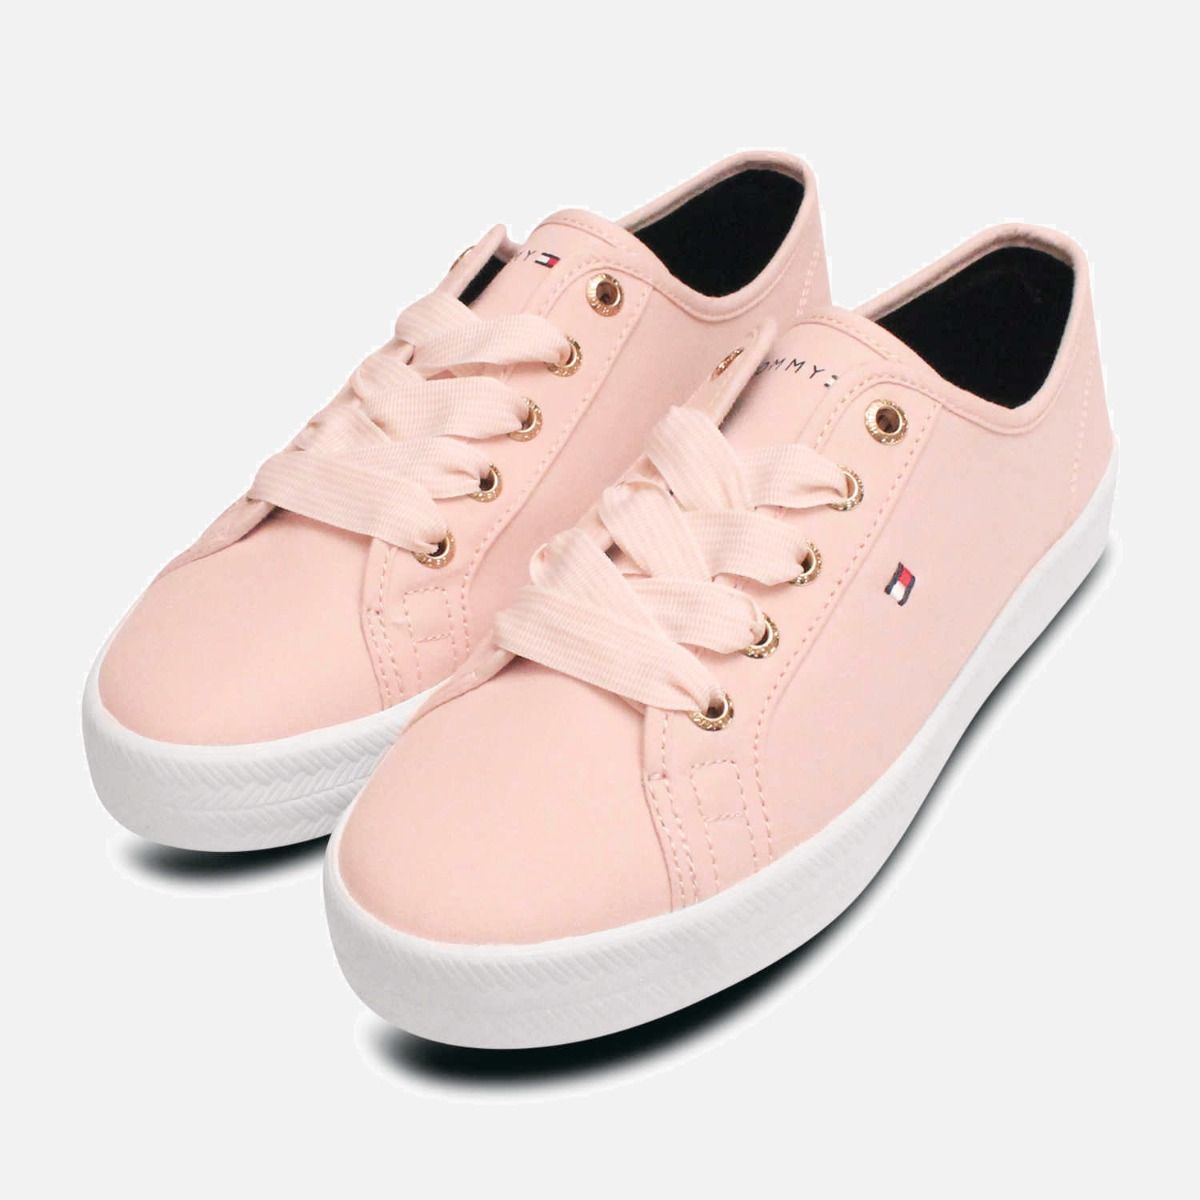 Tommy Hilfiger Pale Pink Nautical Style Sneaker Shoes